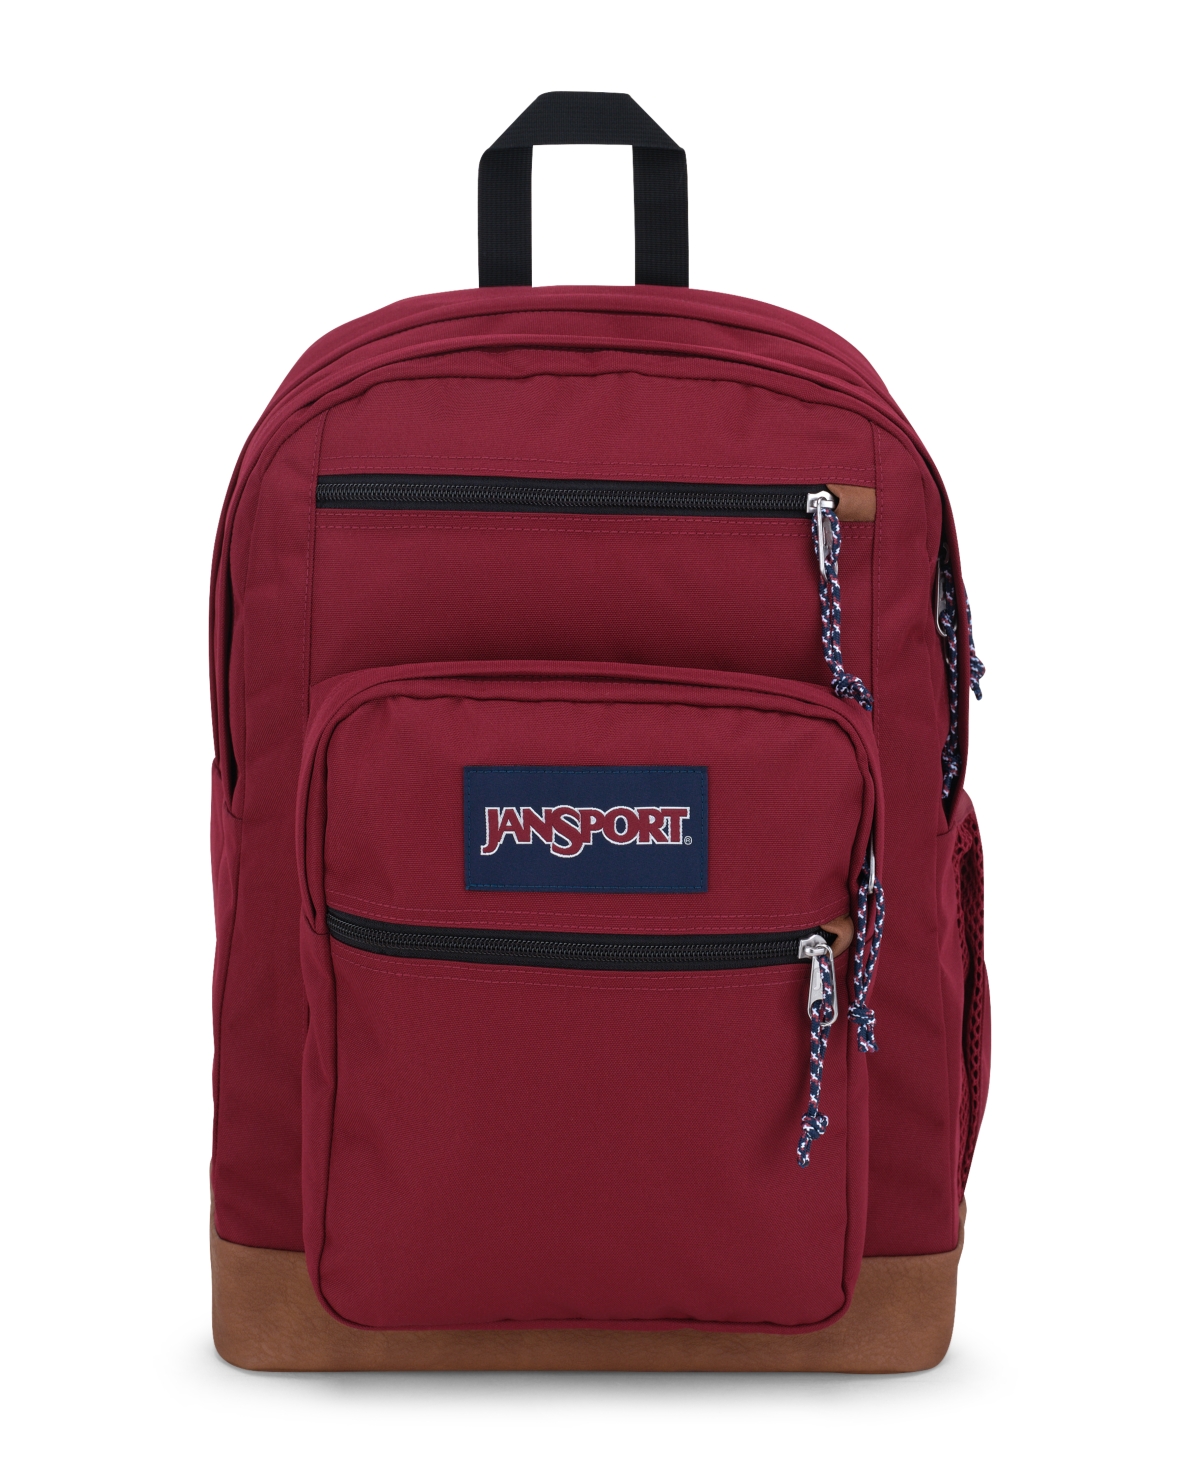 Jansport Cool Student Backpack In Russet Red